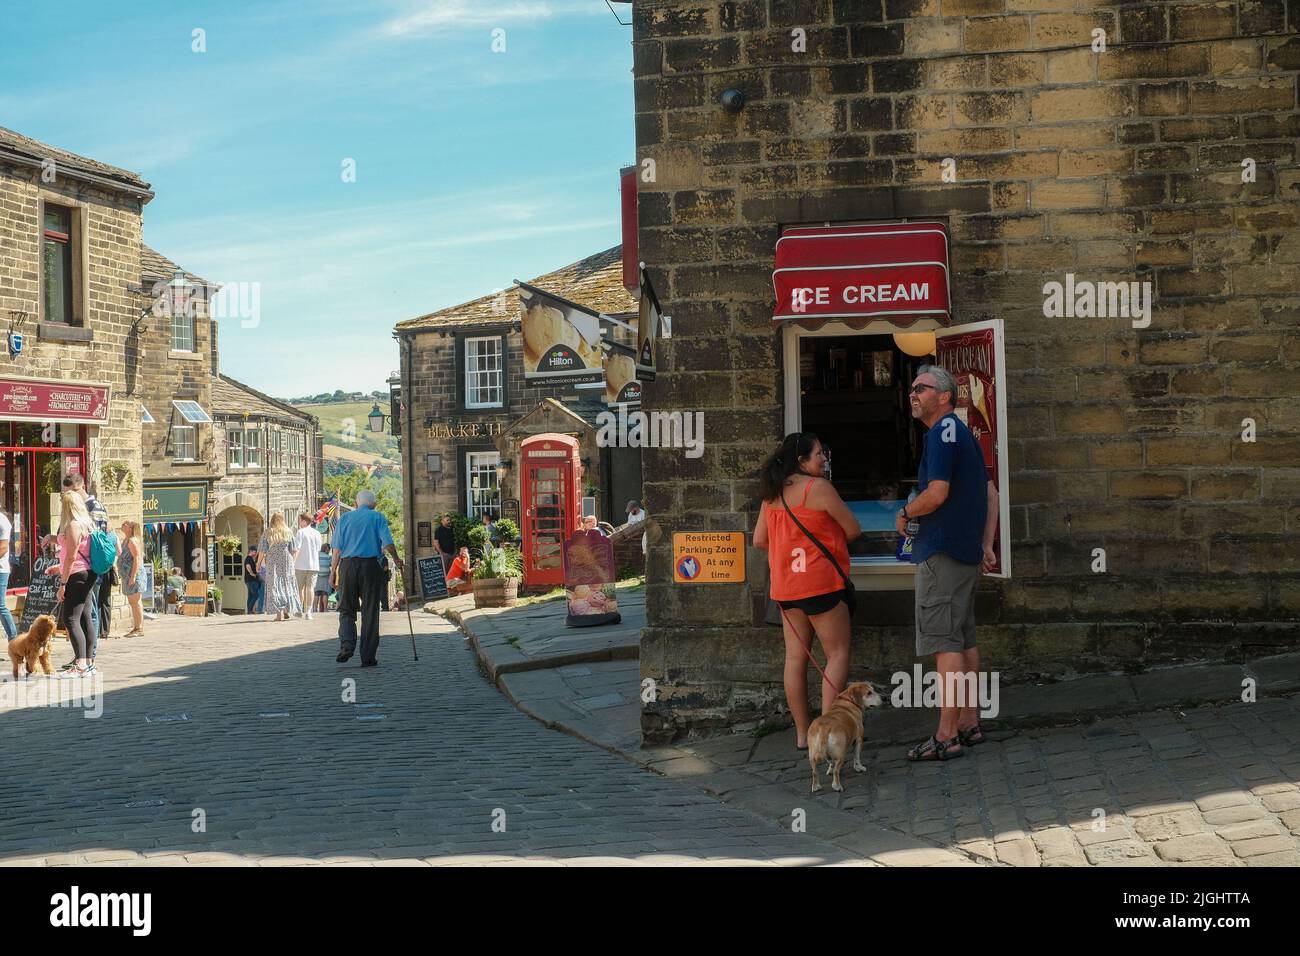 Haworth, West Yorkshire, UK. A couple buying an ice cream from a serving hatch at a cafe on Main Street Haworth on a warm Summer's day. Stock Photo